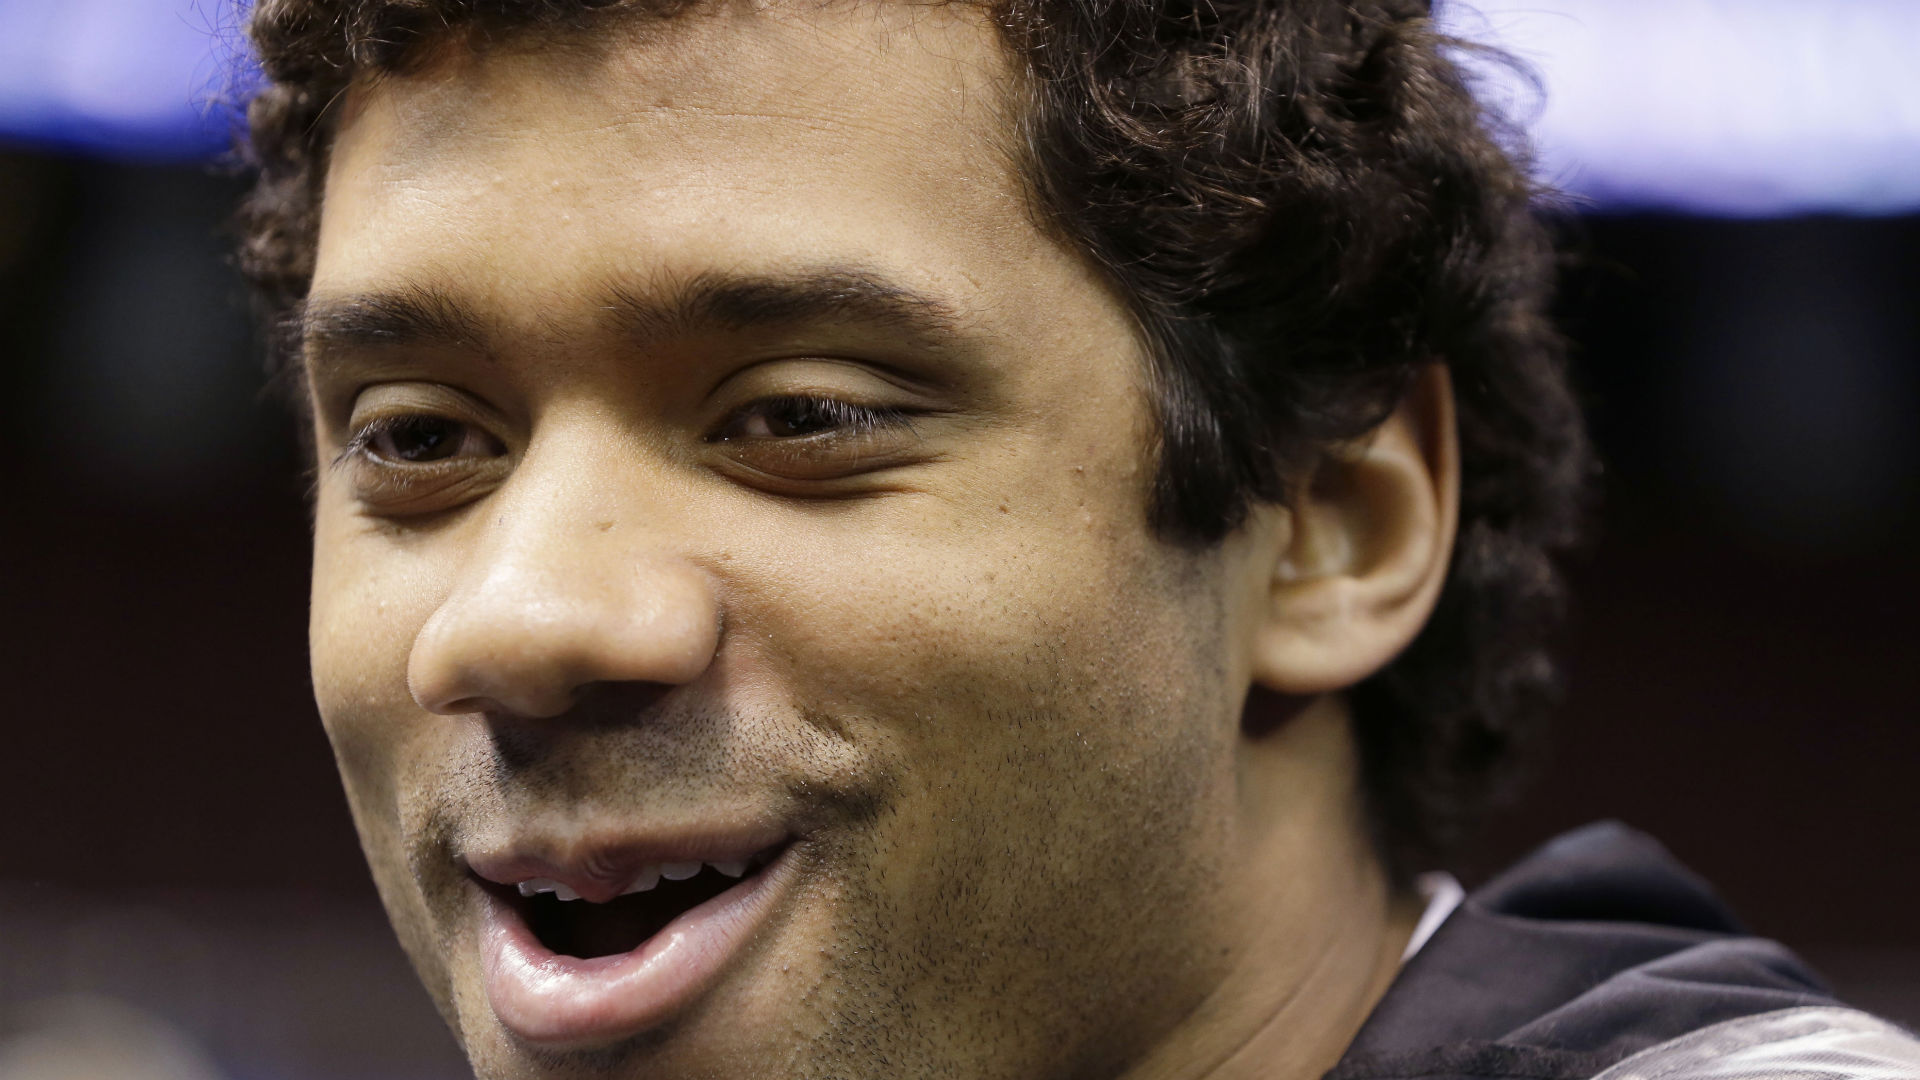 The story behind Russell Wilson's hair | Sporting News